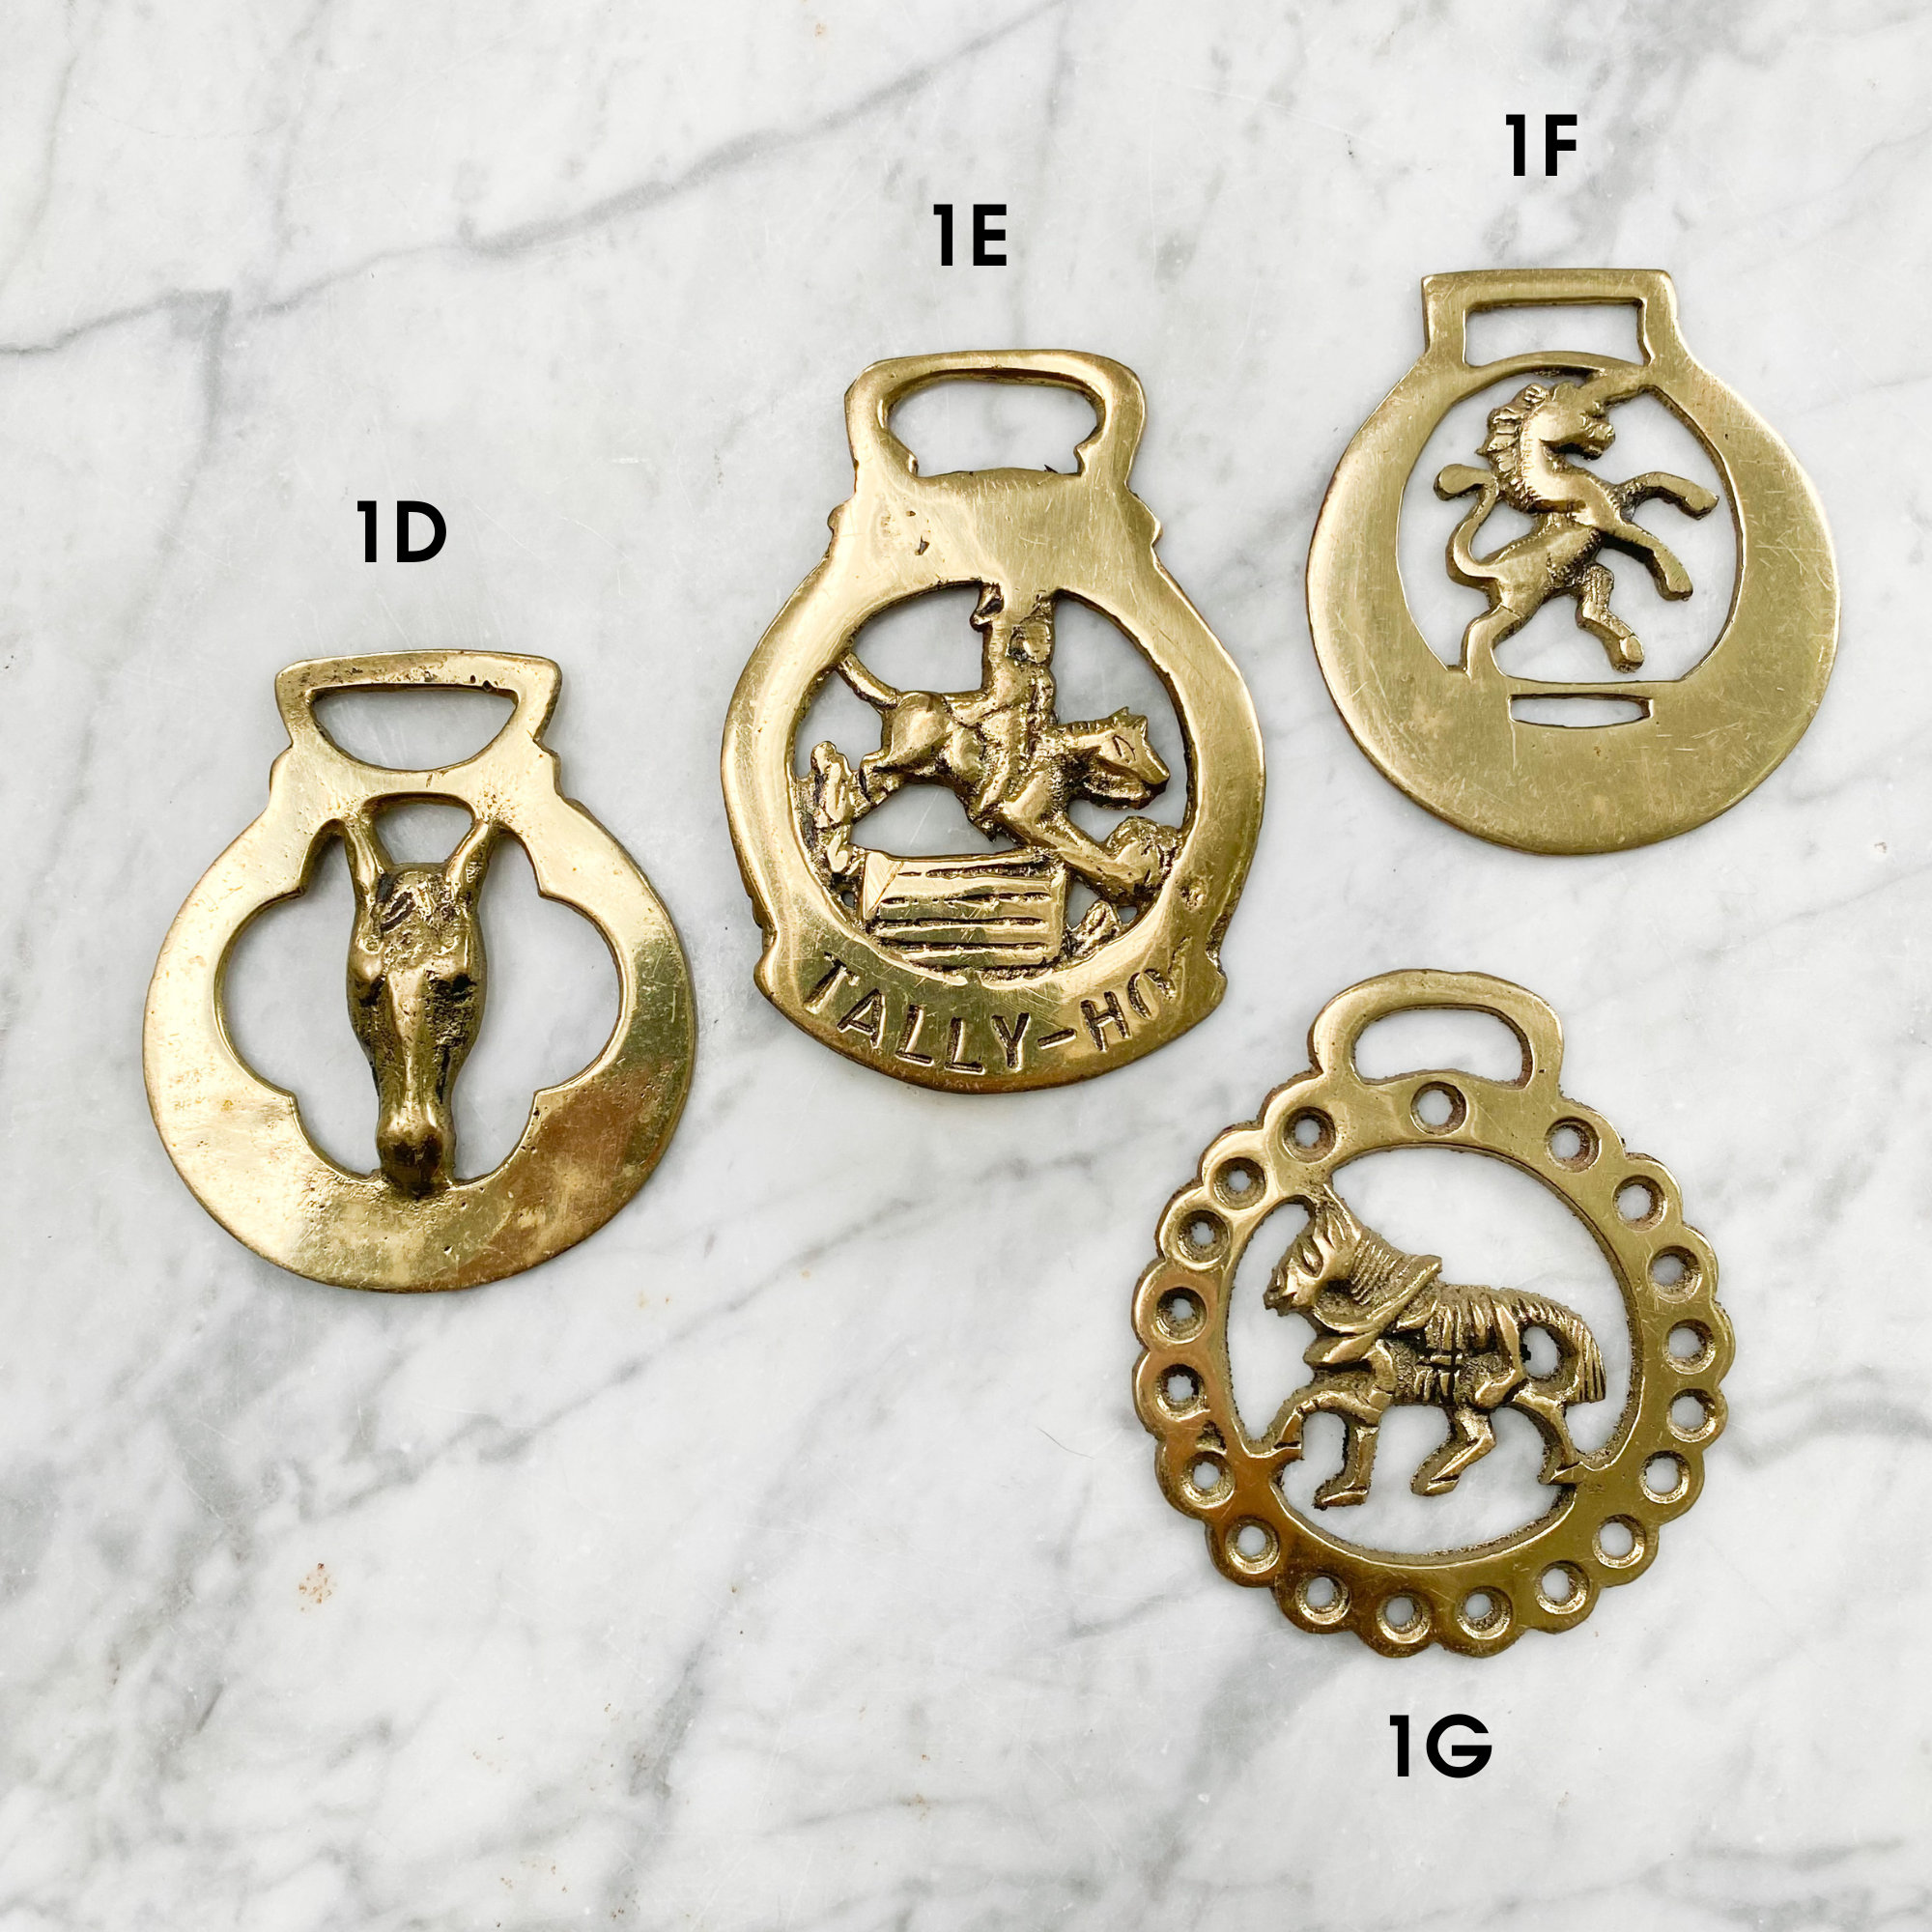 Vintage English Horse Brass Medallions Sold Individually, Brass Bridle  Harness Medals, Antique Vintage Horse Brass Ornaments Made in England 